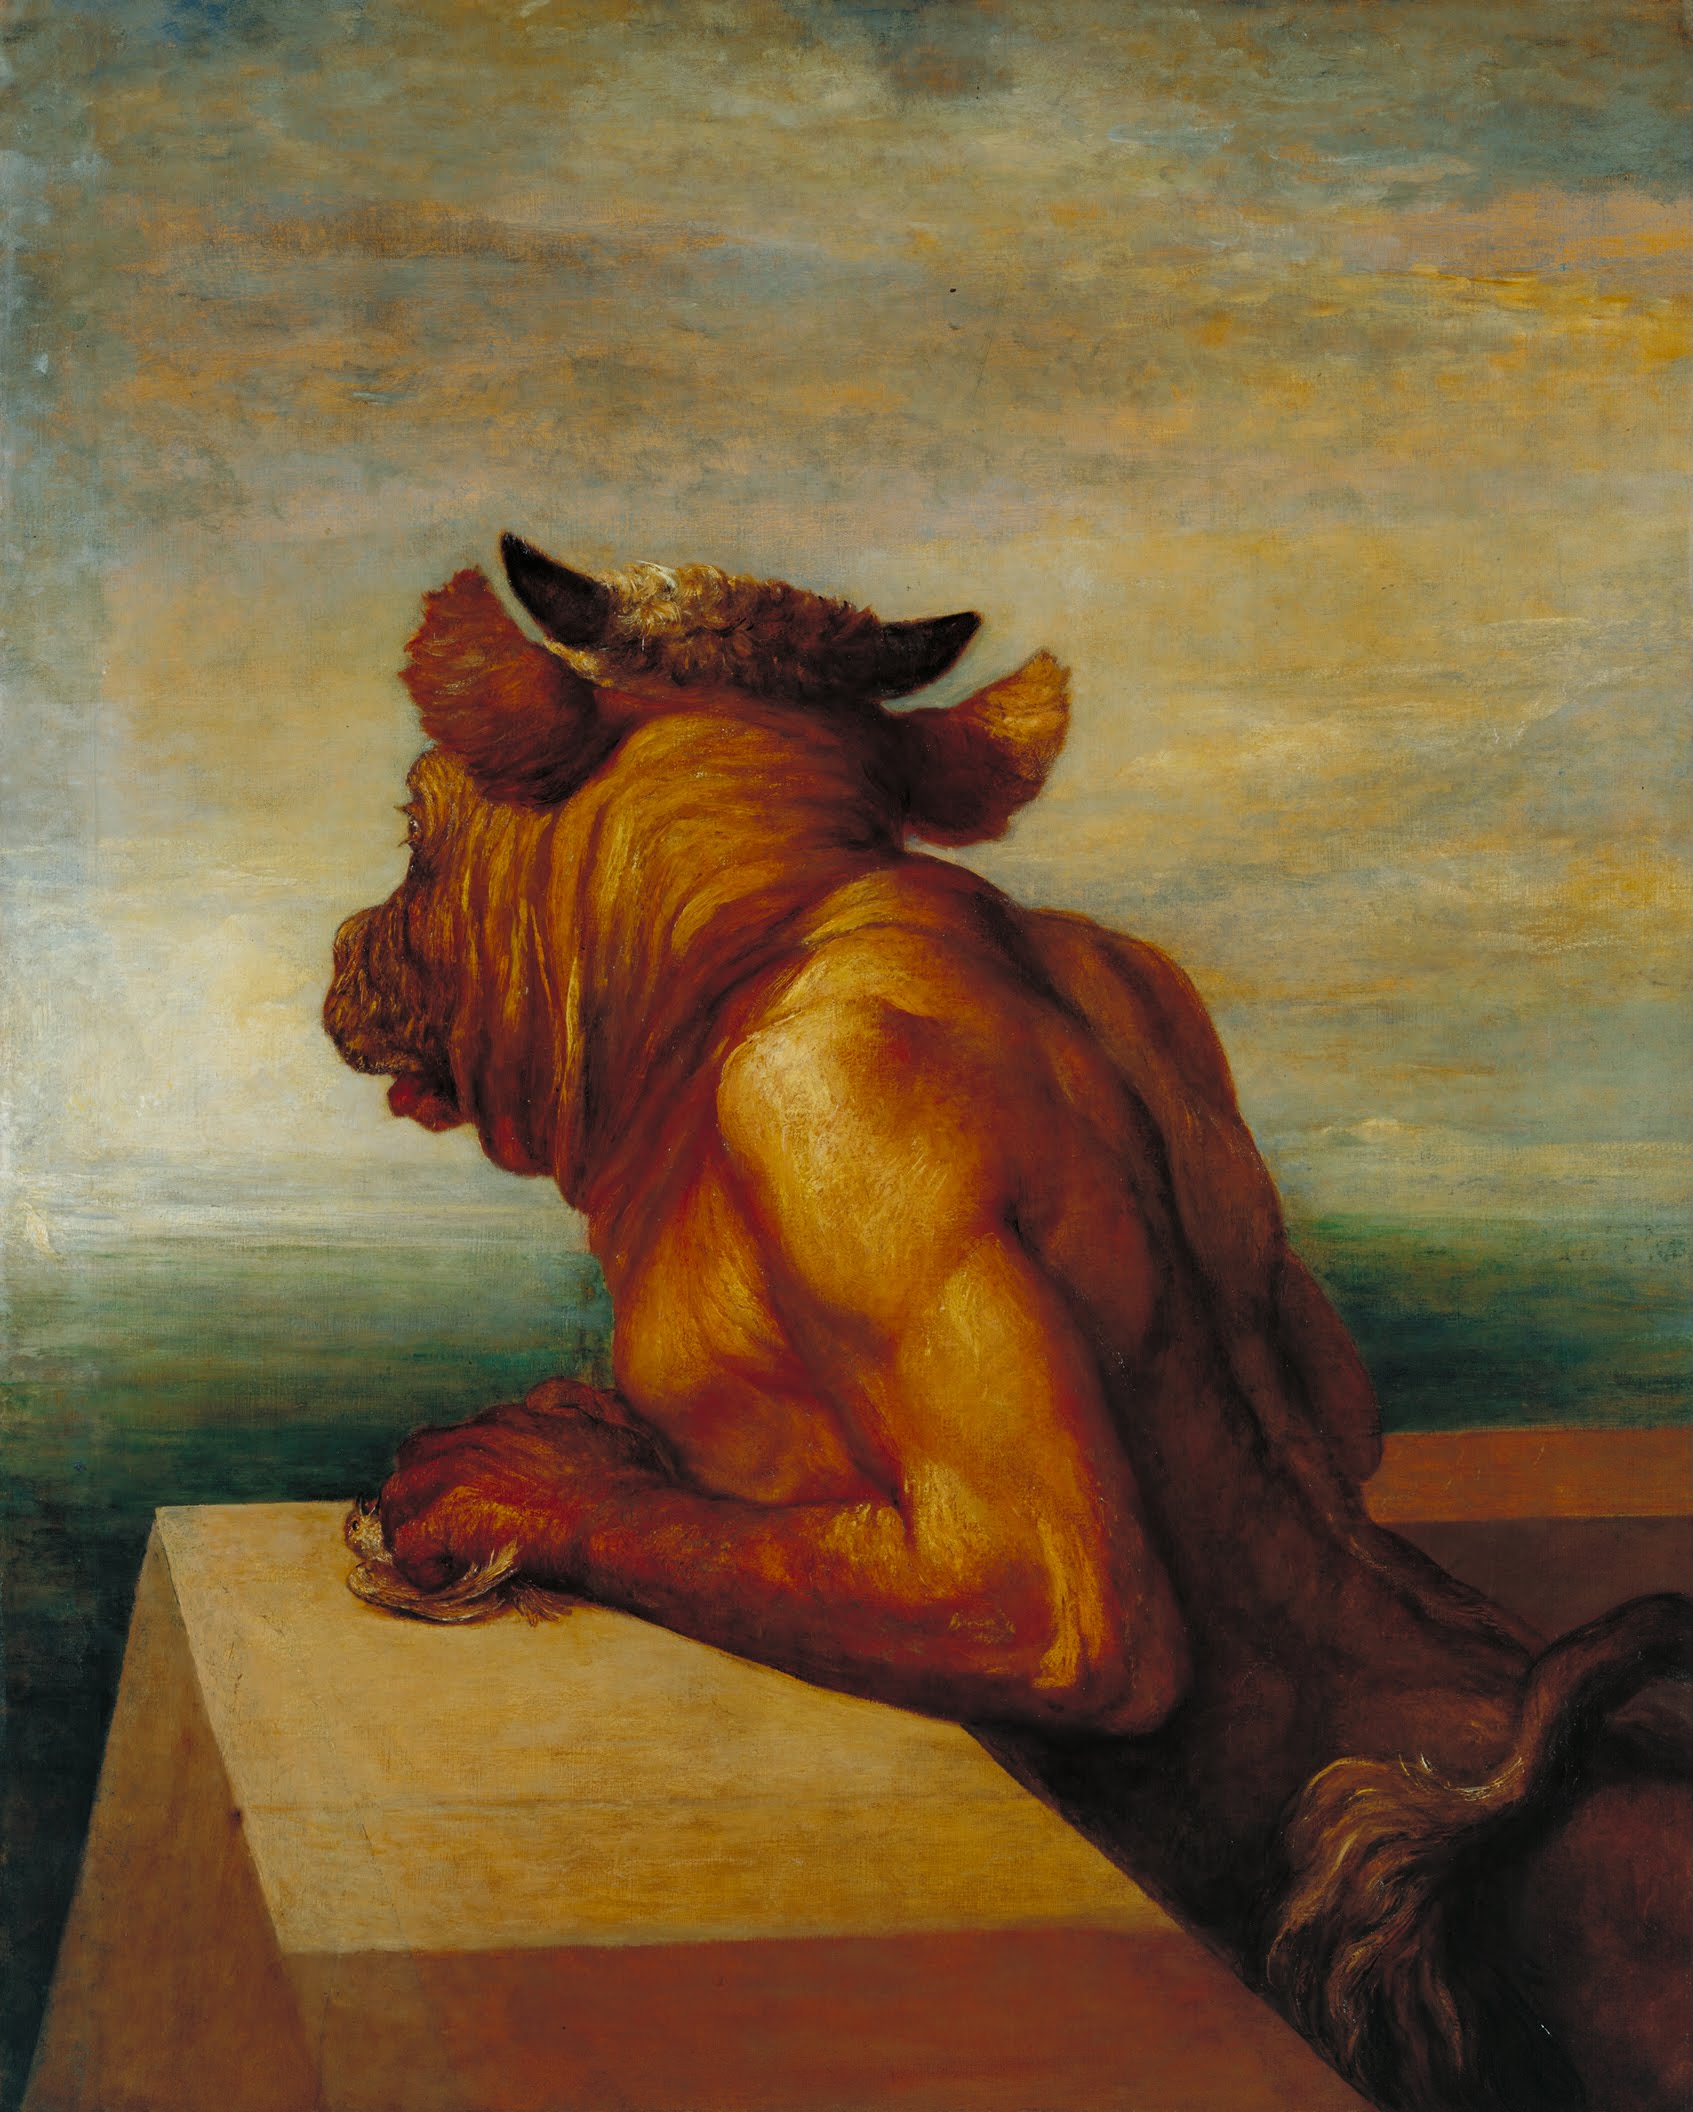 A minotaur leans over the edge of a building and looks out over the sea.